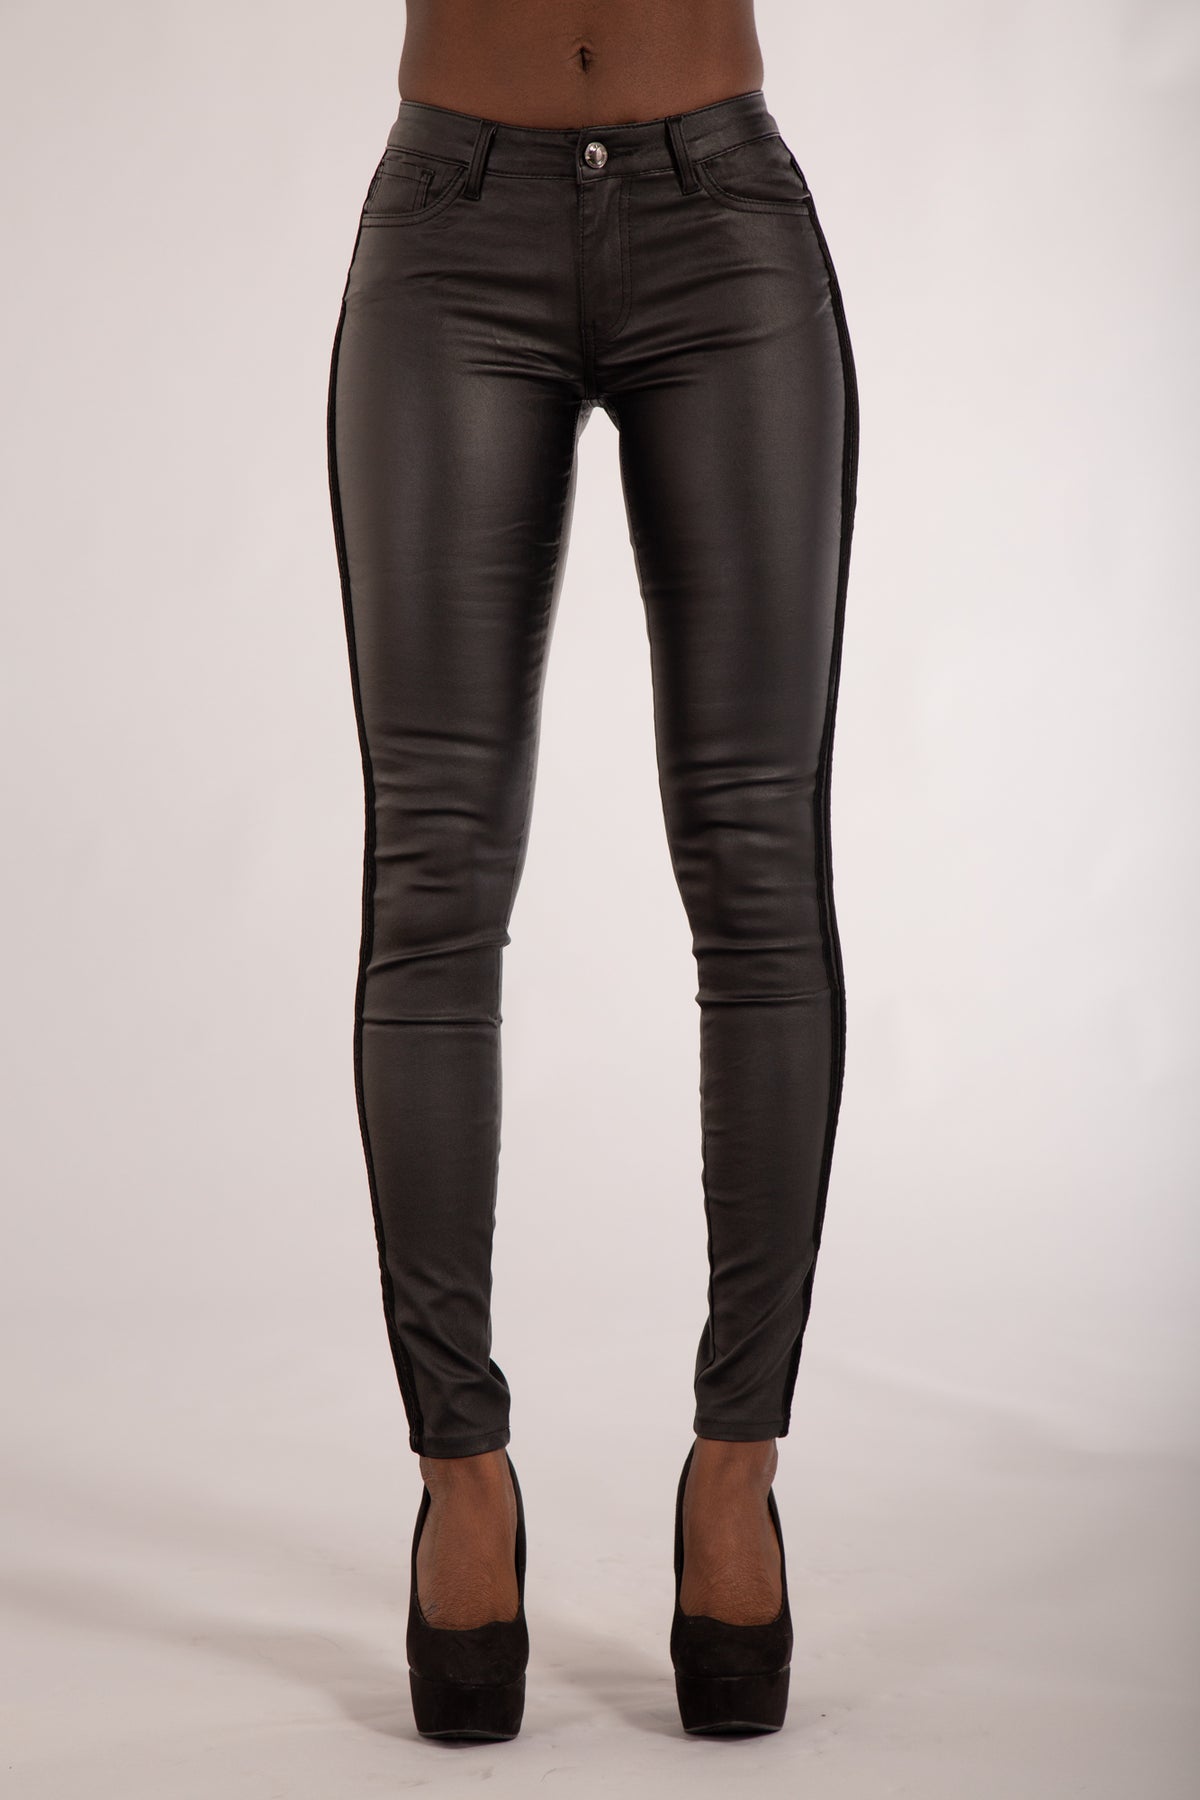 Faux Leather Leggings For Yetsye Women Wet Look Full Length High Waist Leather  Trousers  Fruugo IN